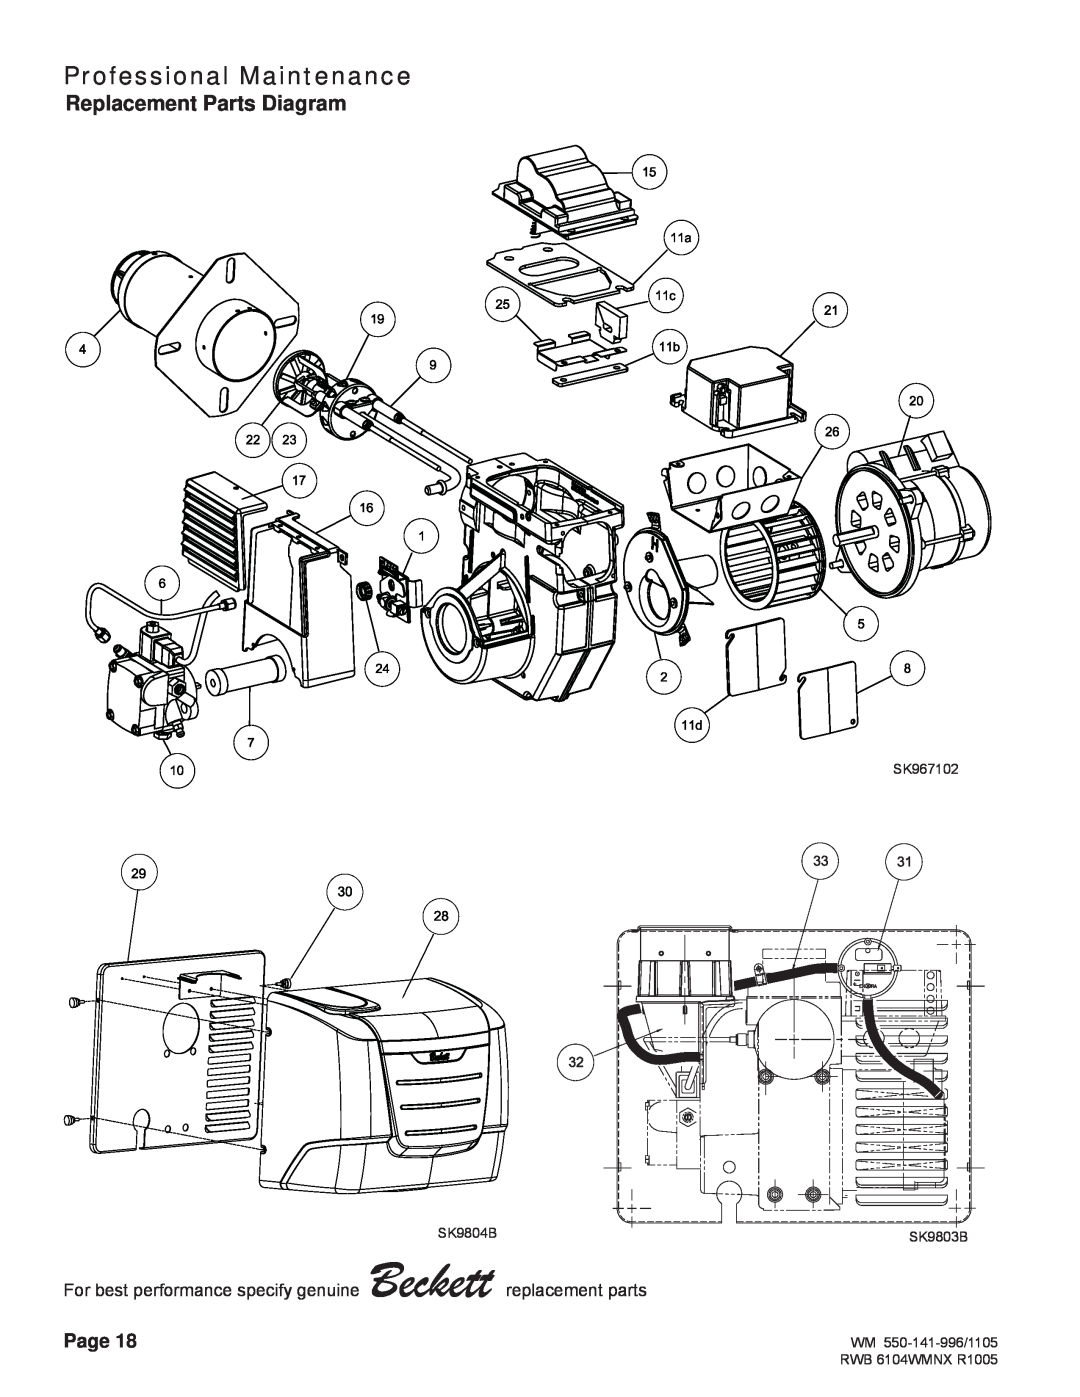 Weil-McLain NX manual Replacement Parts Diagram, Professional Maintenance, Page, SK967102, SK9804B, SK9803B 